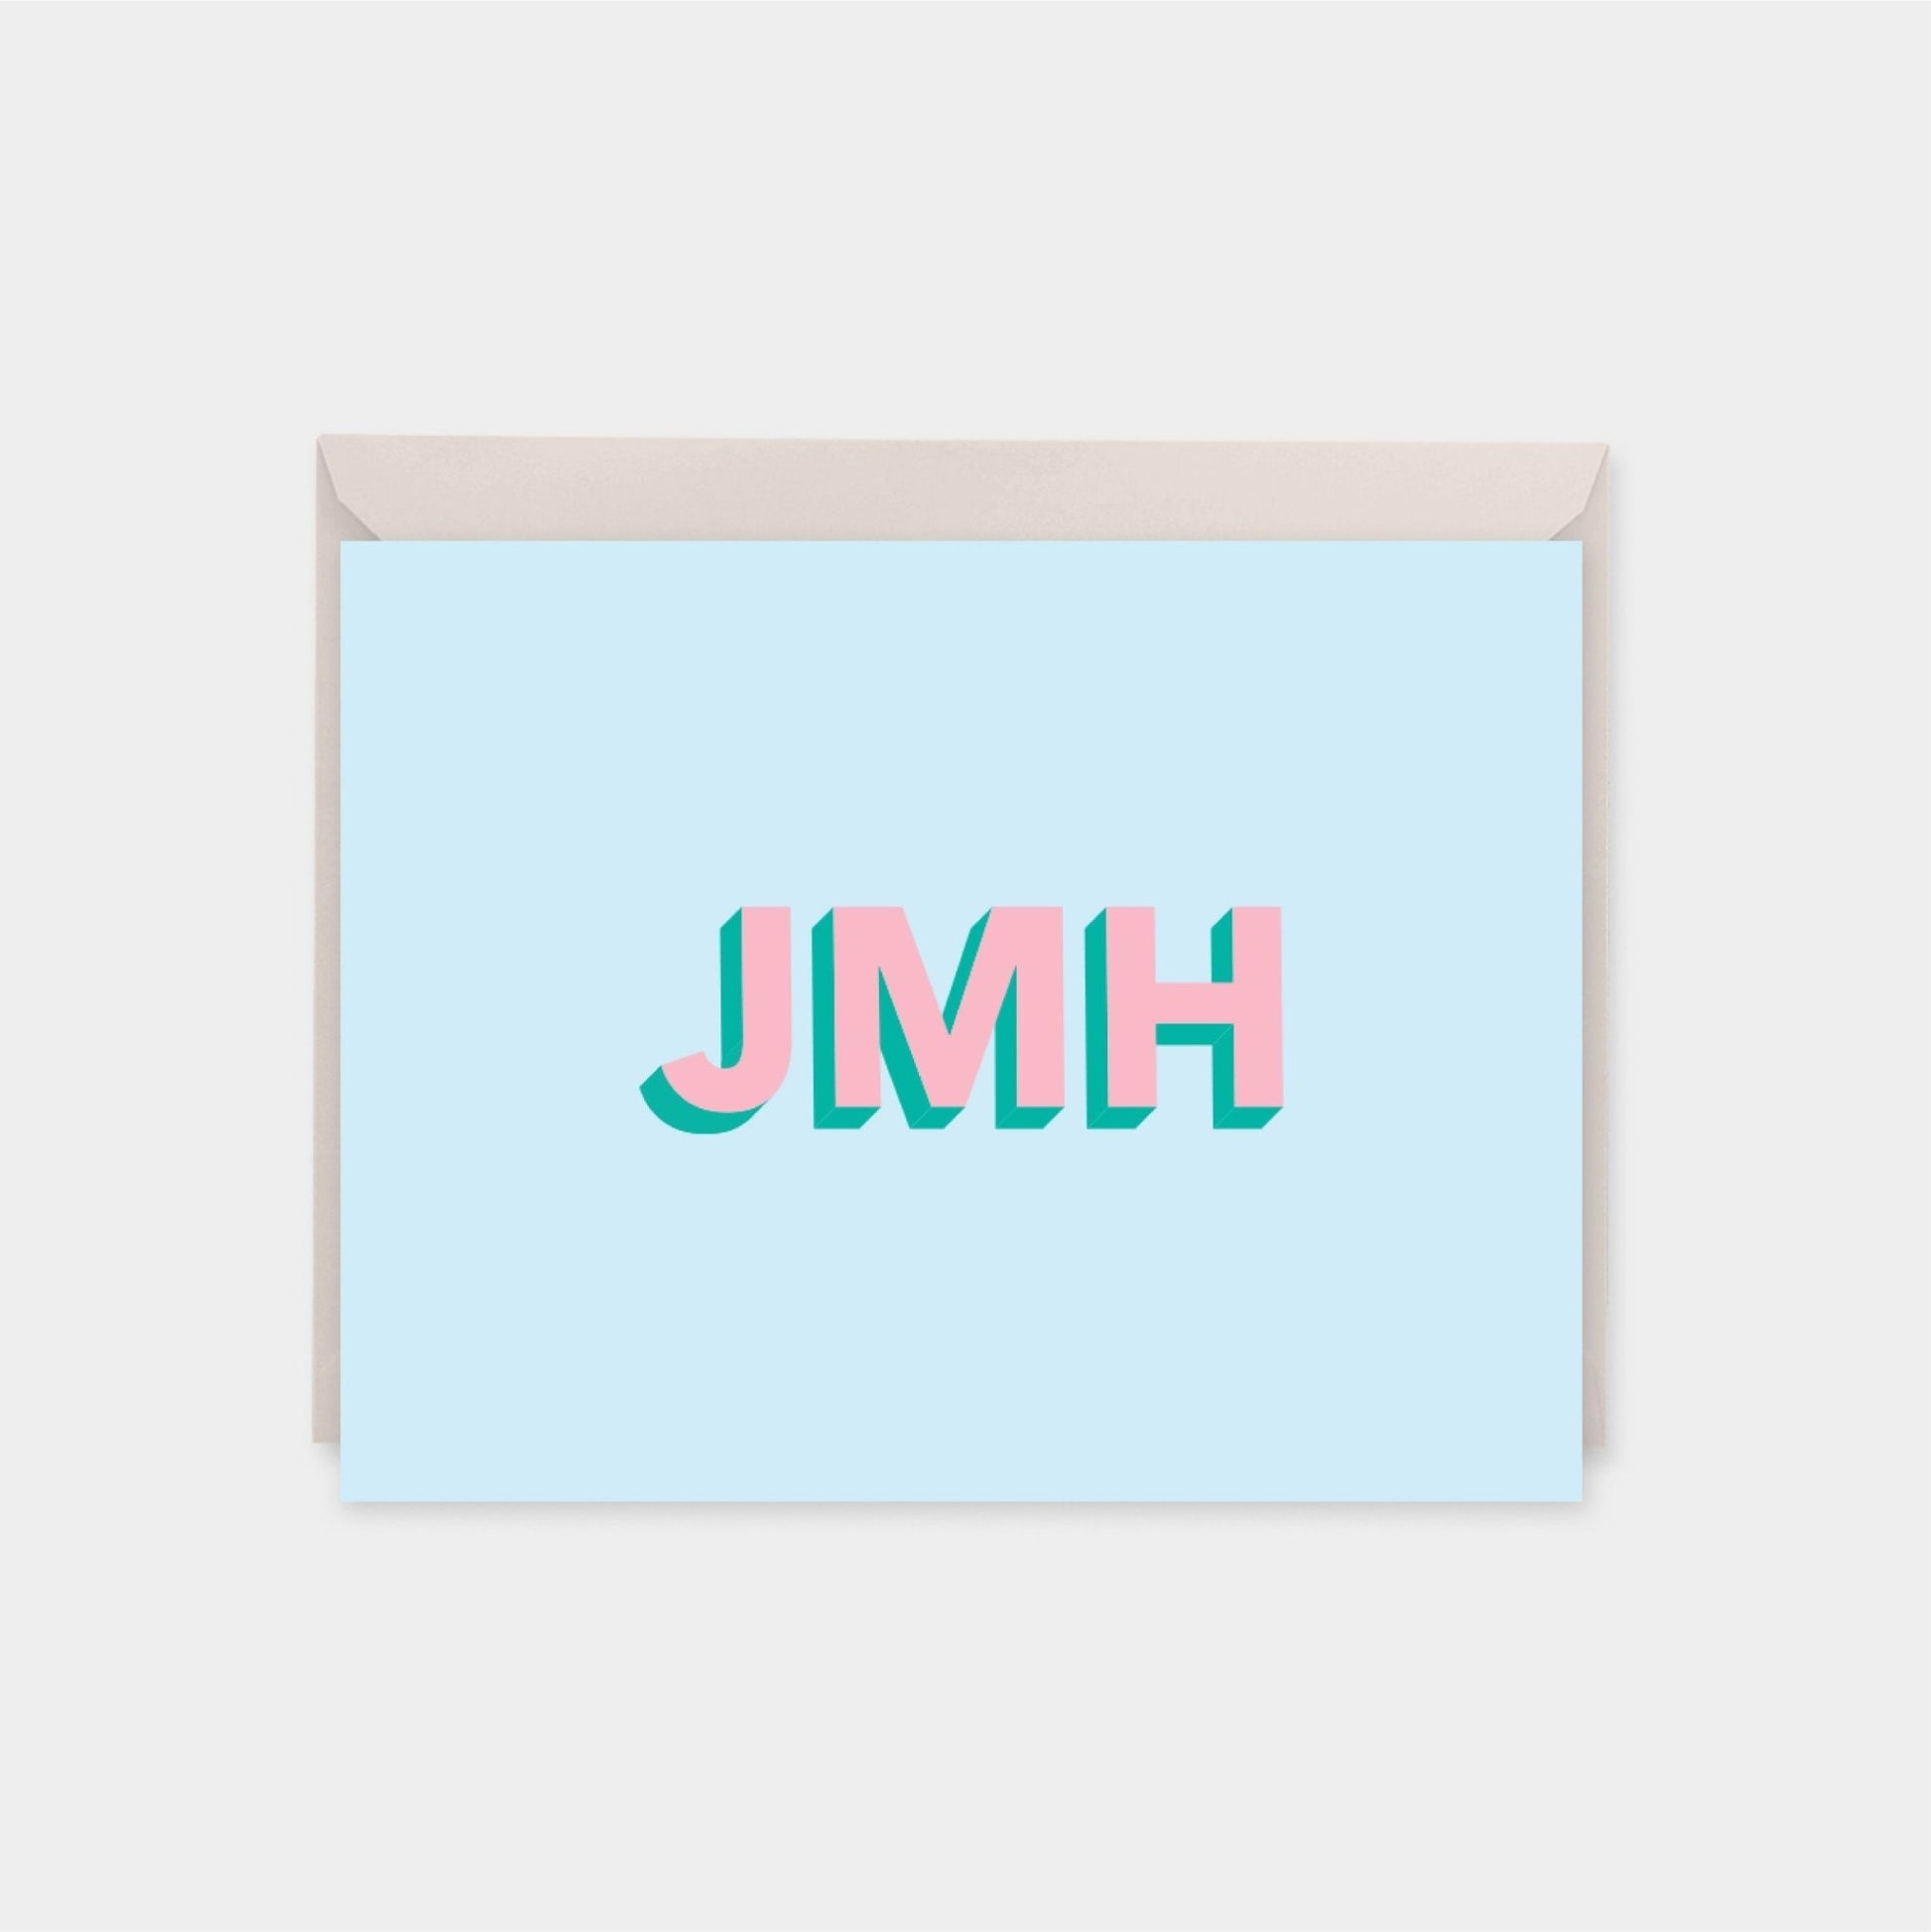 Monogram Note Cards with 3D Text, Modern